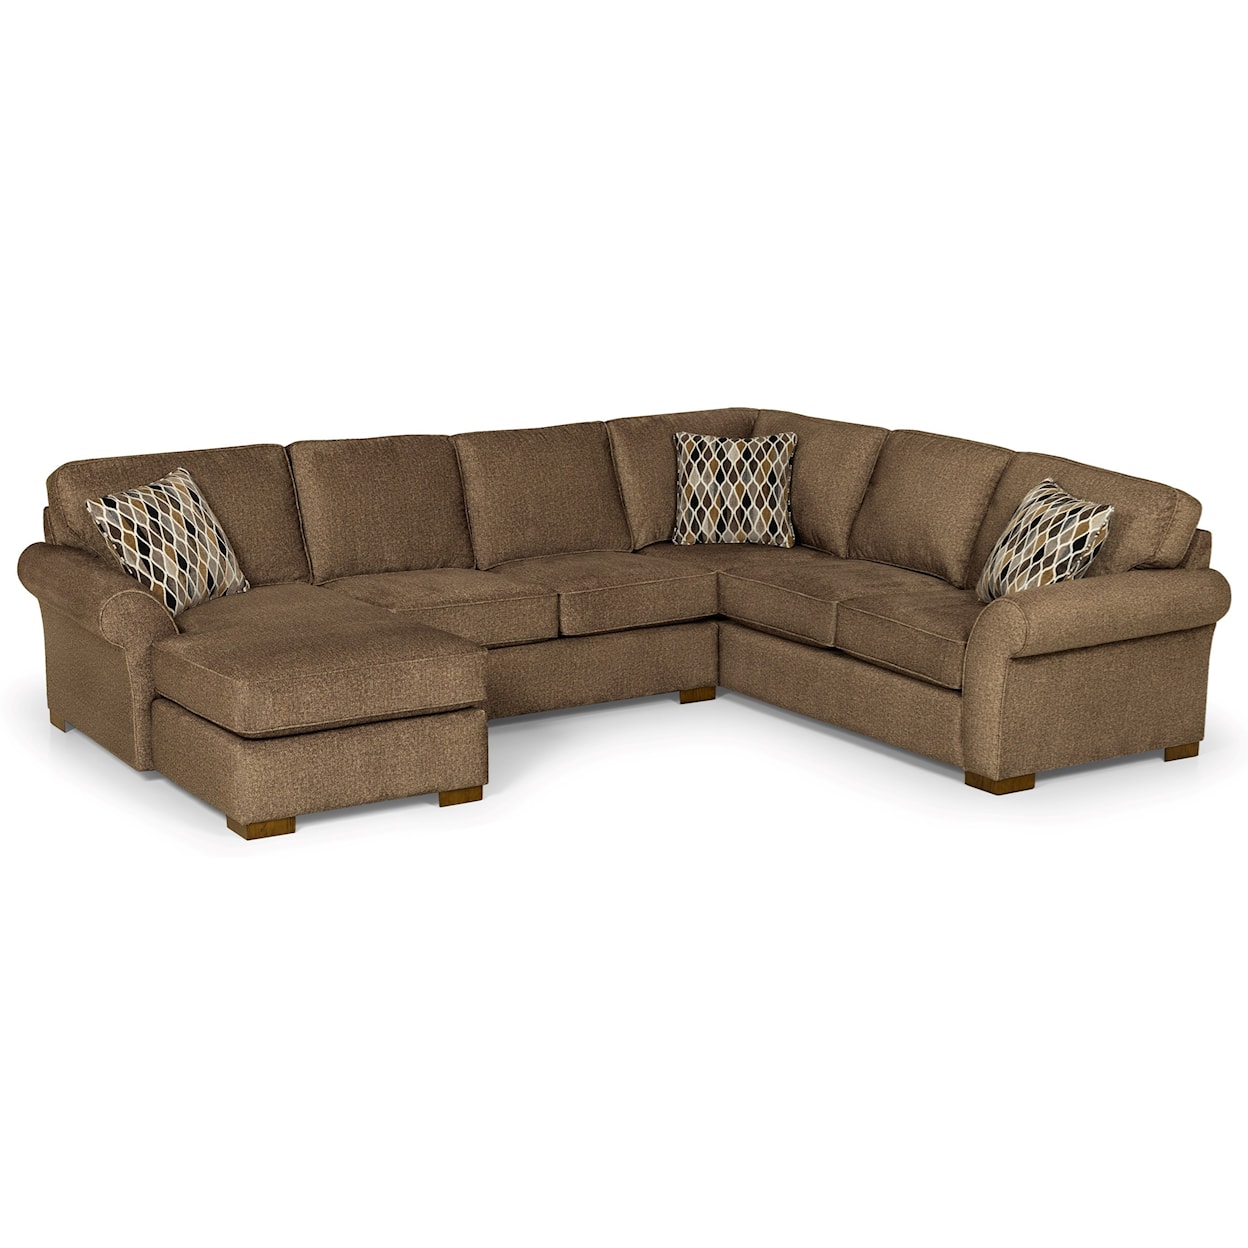 Stanton 551 5-Seat Sectional Sofa w/ LAF Chaise & Storag